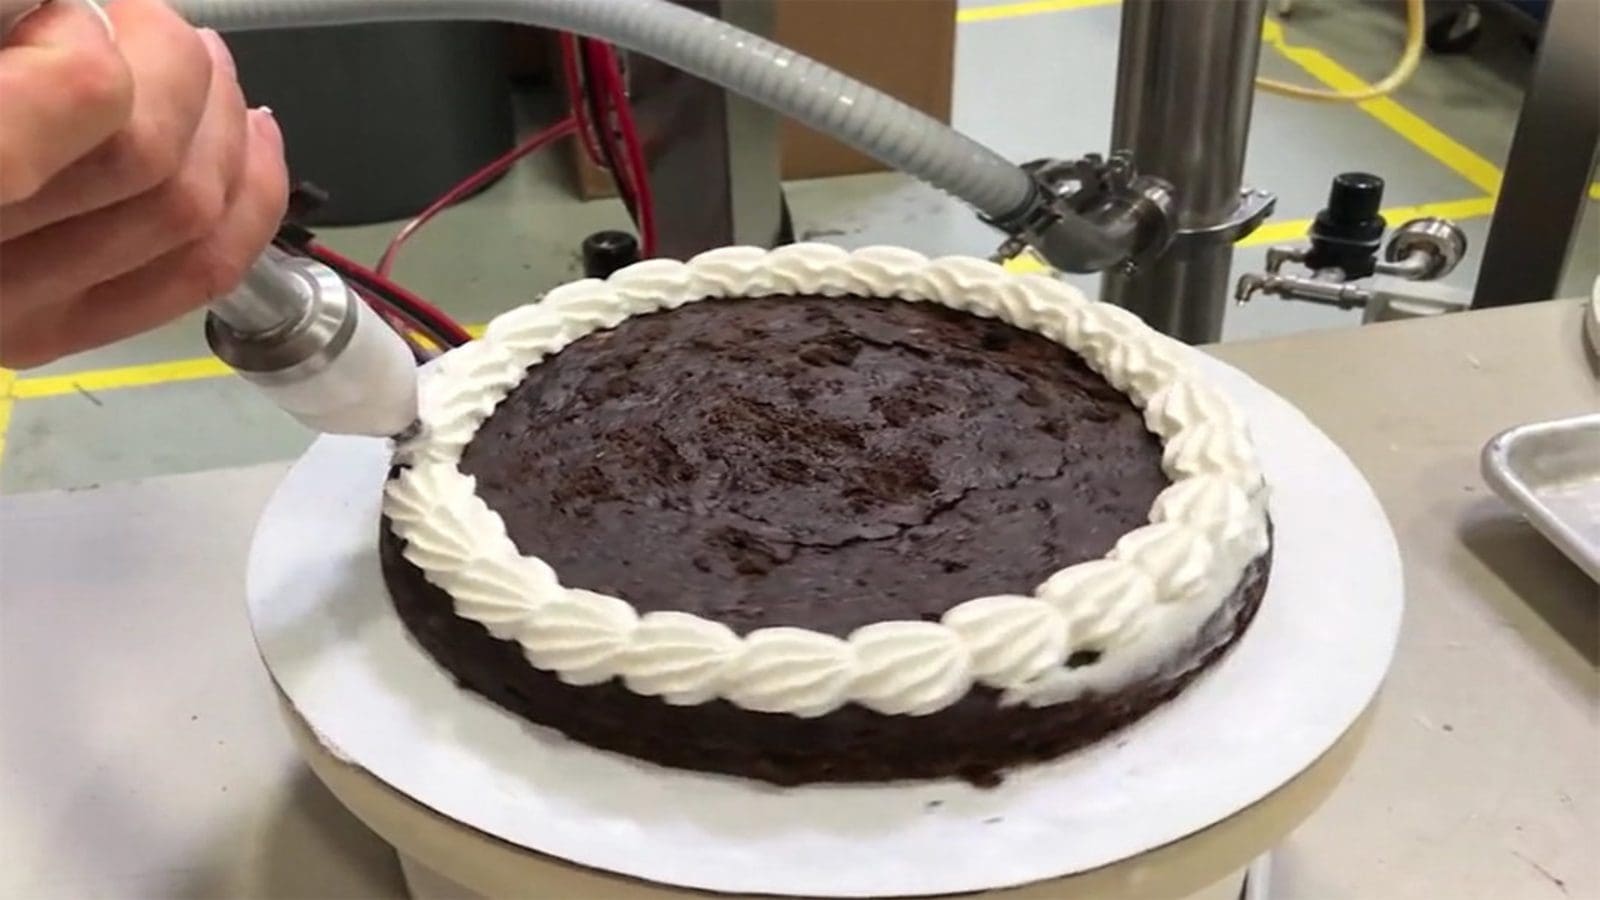 Unifiller launches automated cake decorating system